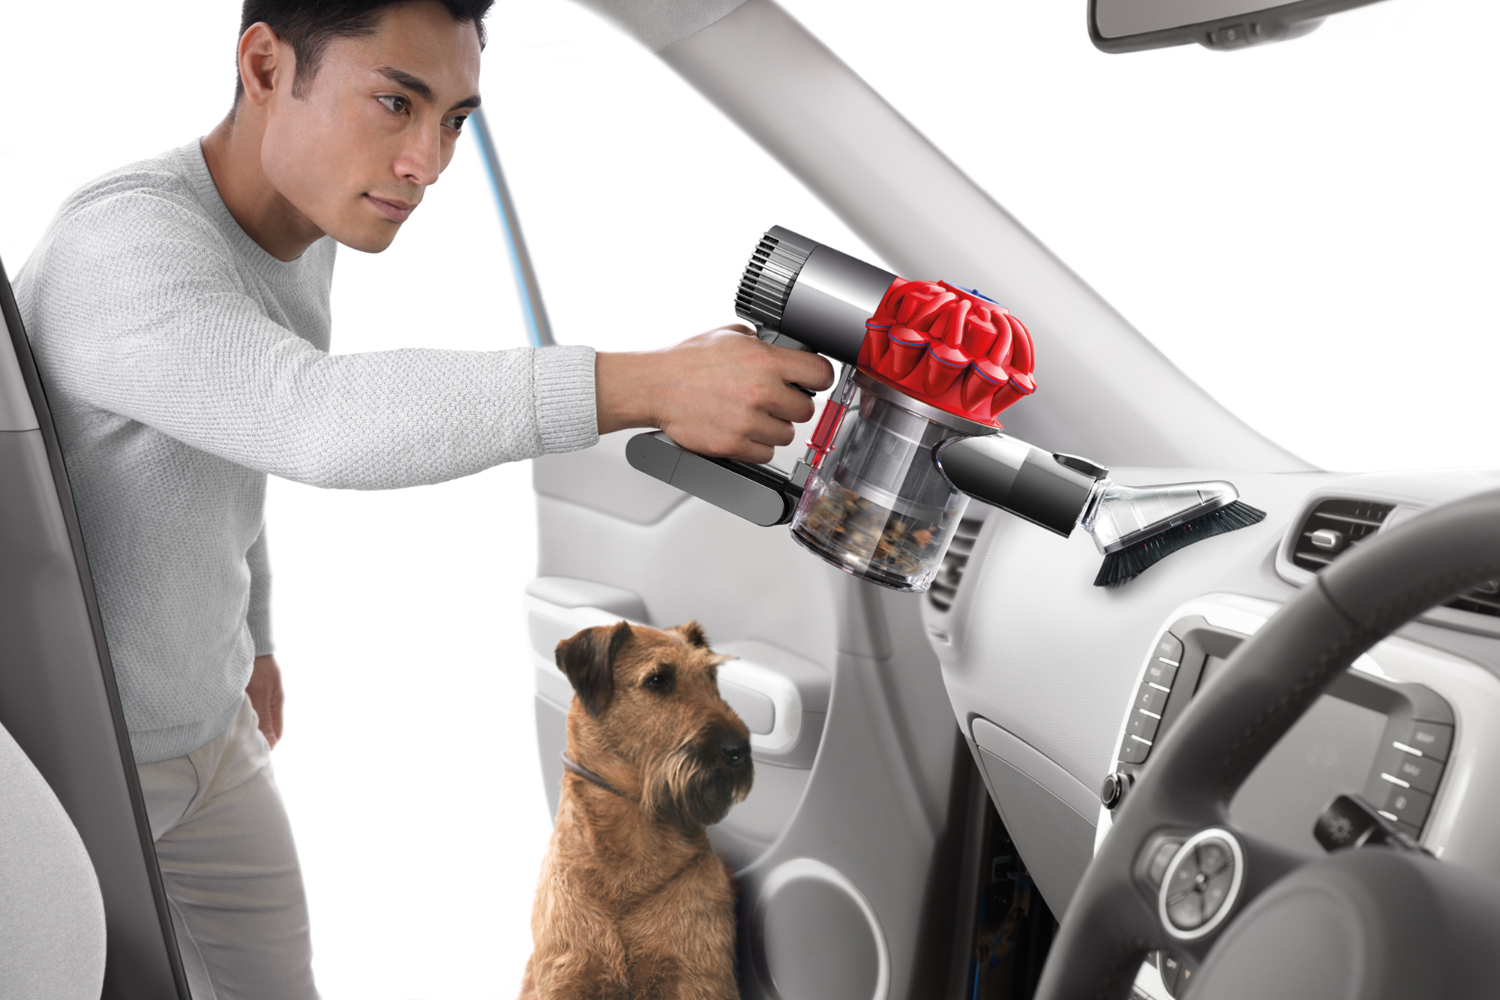 walmart knocks down prices on dyson handheld vacuums in post prime day sale v6 trigger vacuum car  boat 3